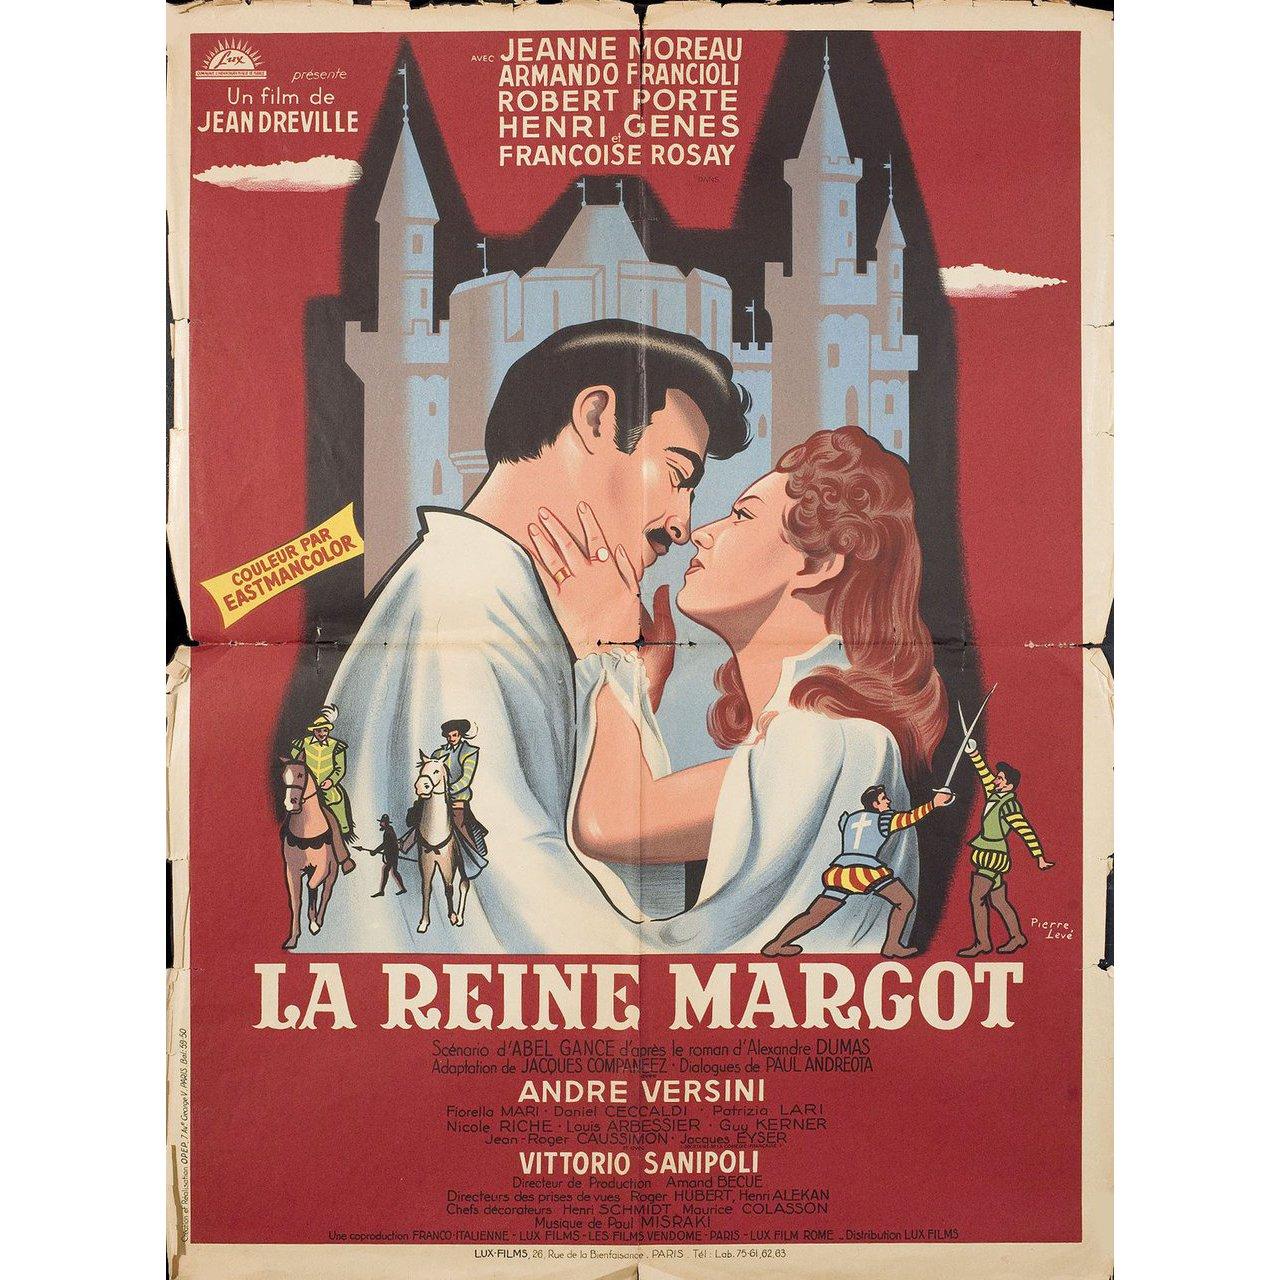 Original 1954 French moyenne poster by Pierre Leve' for the film “Queen Margot” (La Reine Margot) directed by Jean Dreville with Jeanne Moreau / Armando Francioli / Robert Porte / Henri Genes. Good-very good condition, folded. Many original posters